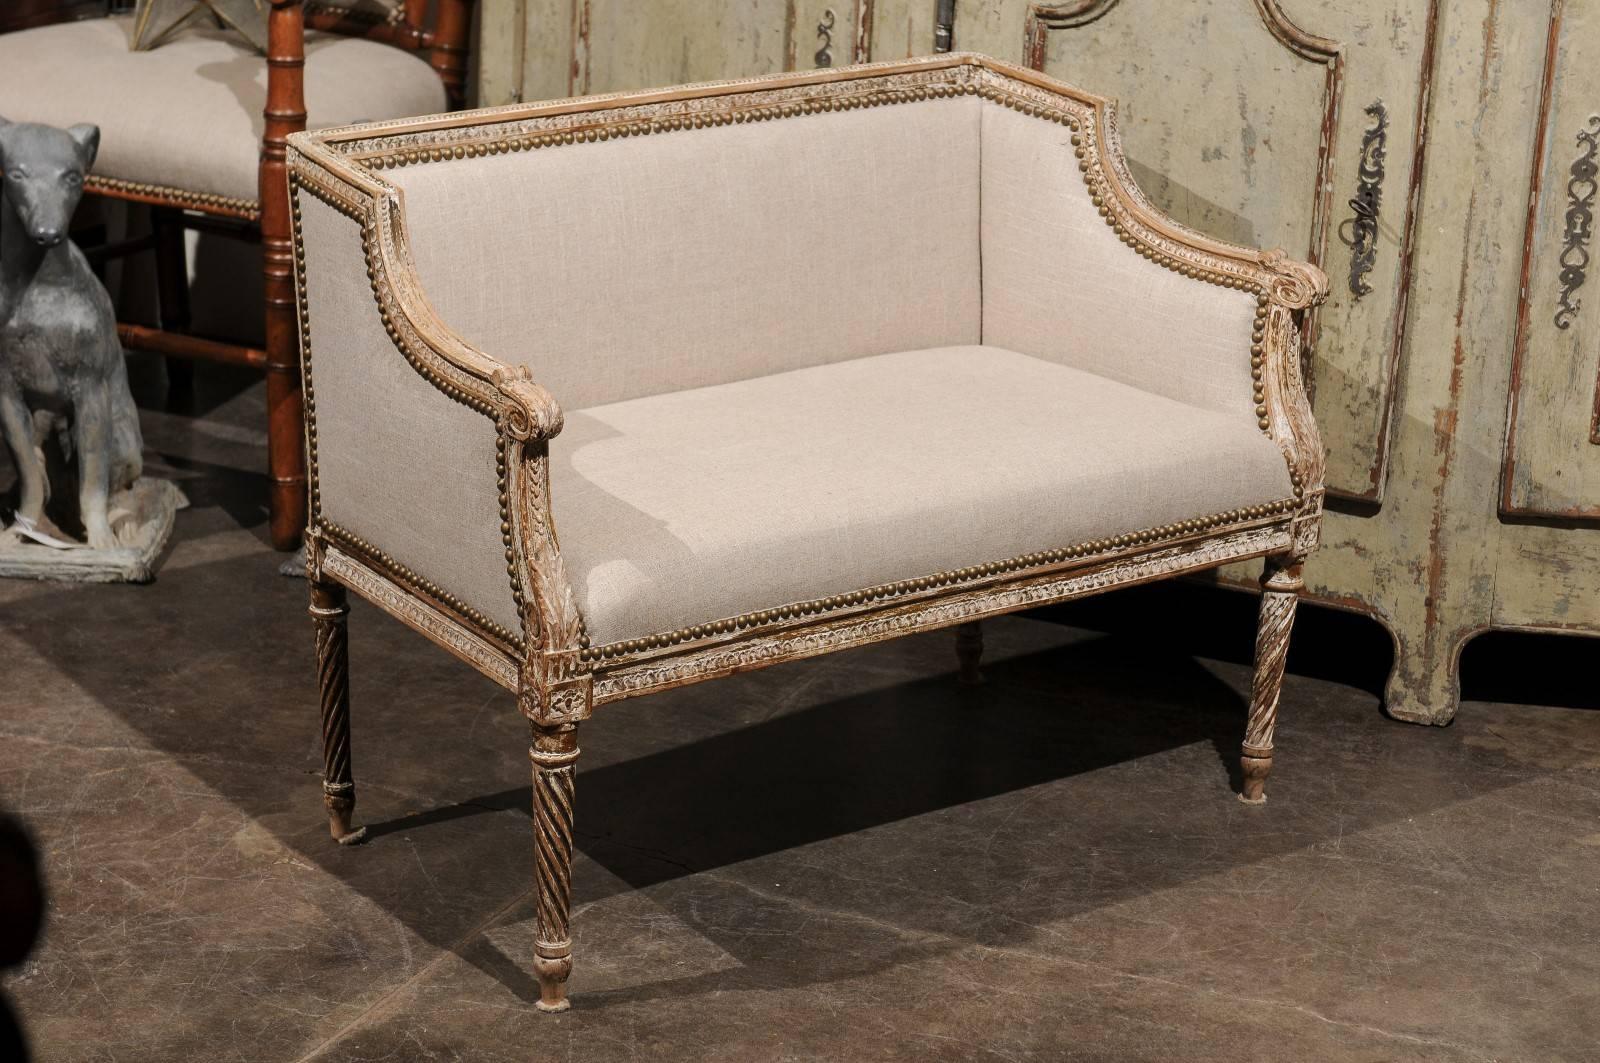 19th Century Petite 1820-1840 French Louis XVI Style Upholstered Bench with Distressed Finish